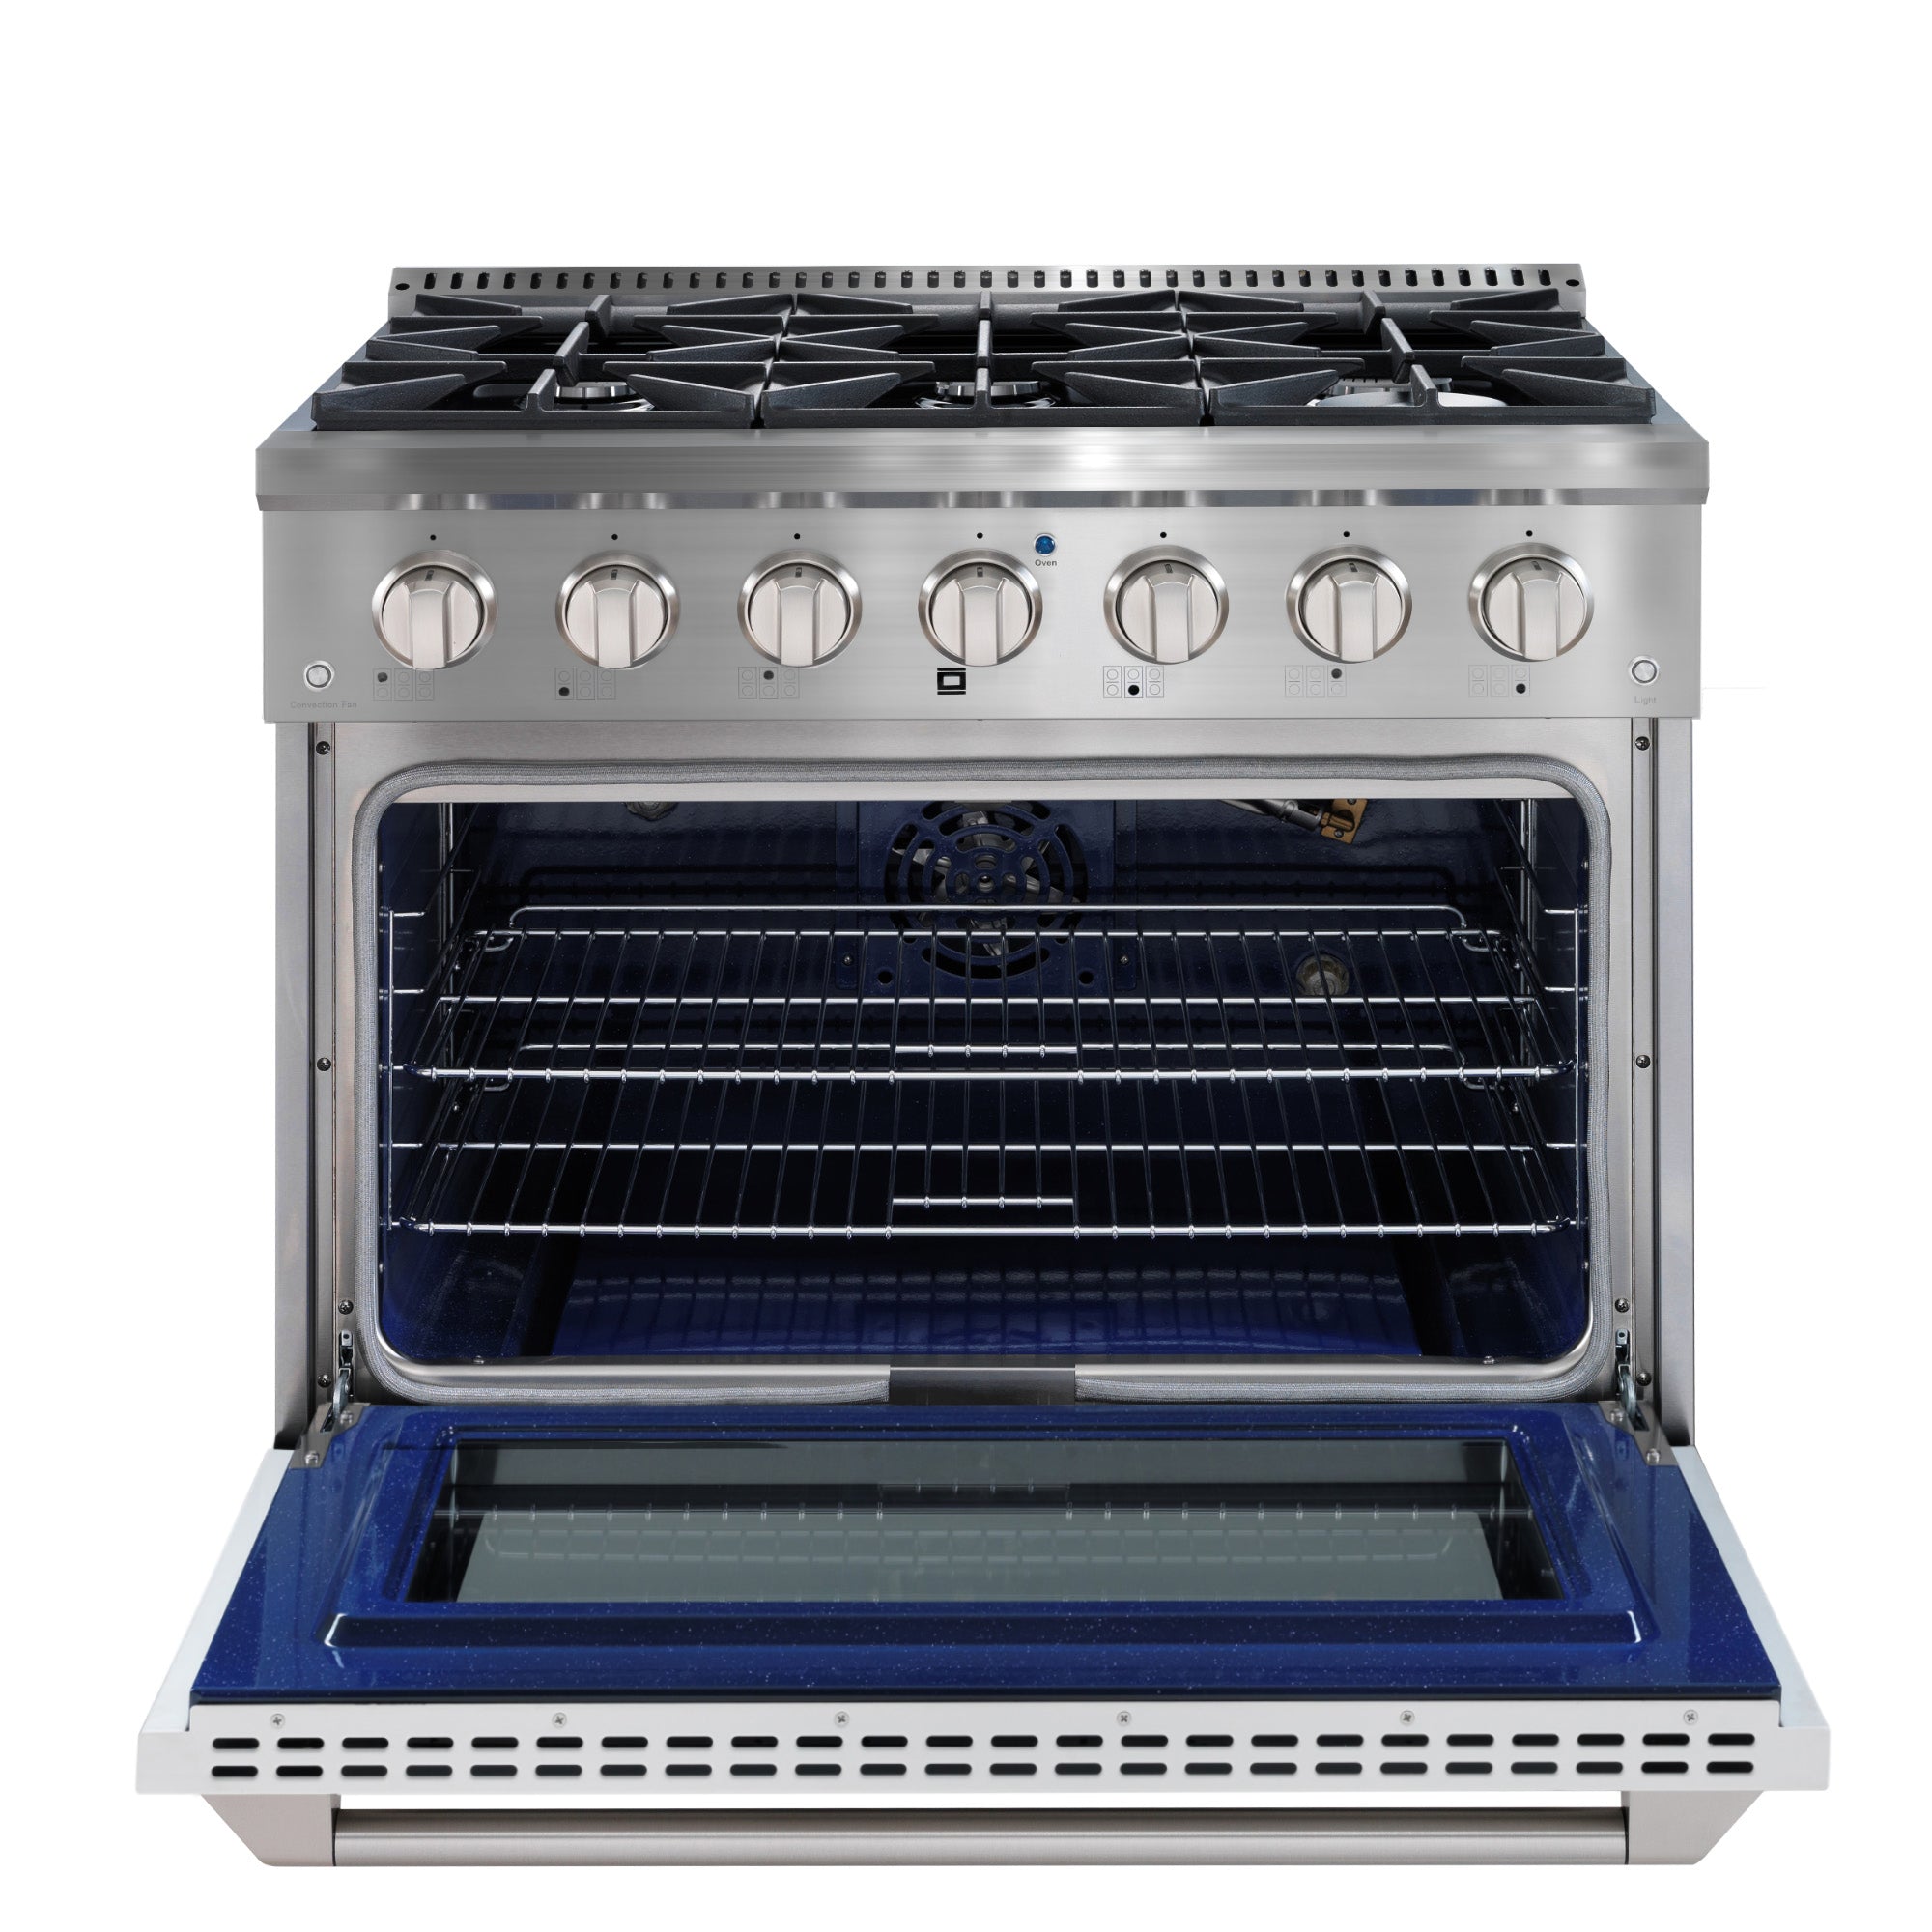 Ancona 36” 5.2 cu. ft. Gas Range with 6 Burners and Convection Oven in Stainless Steel with White Door